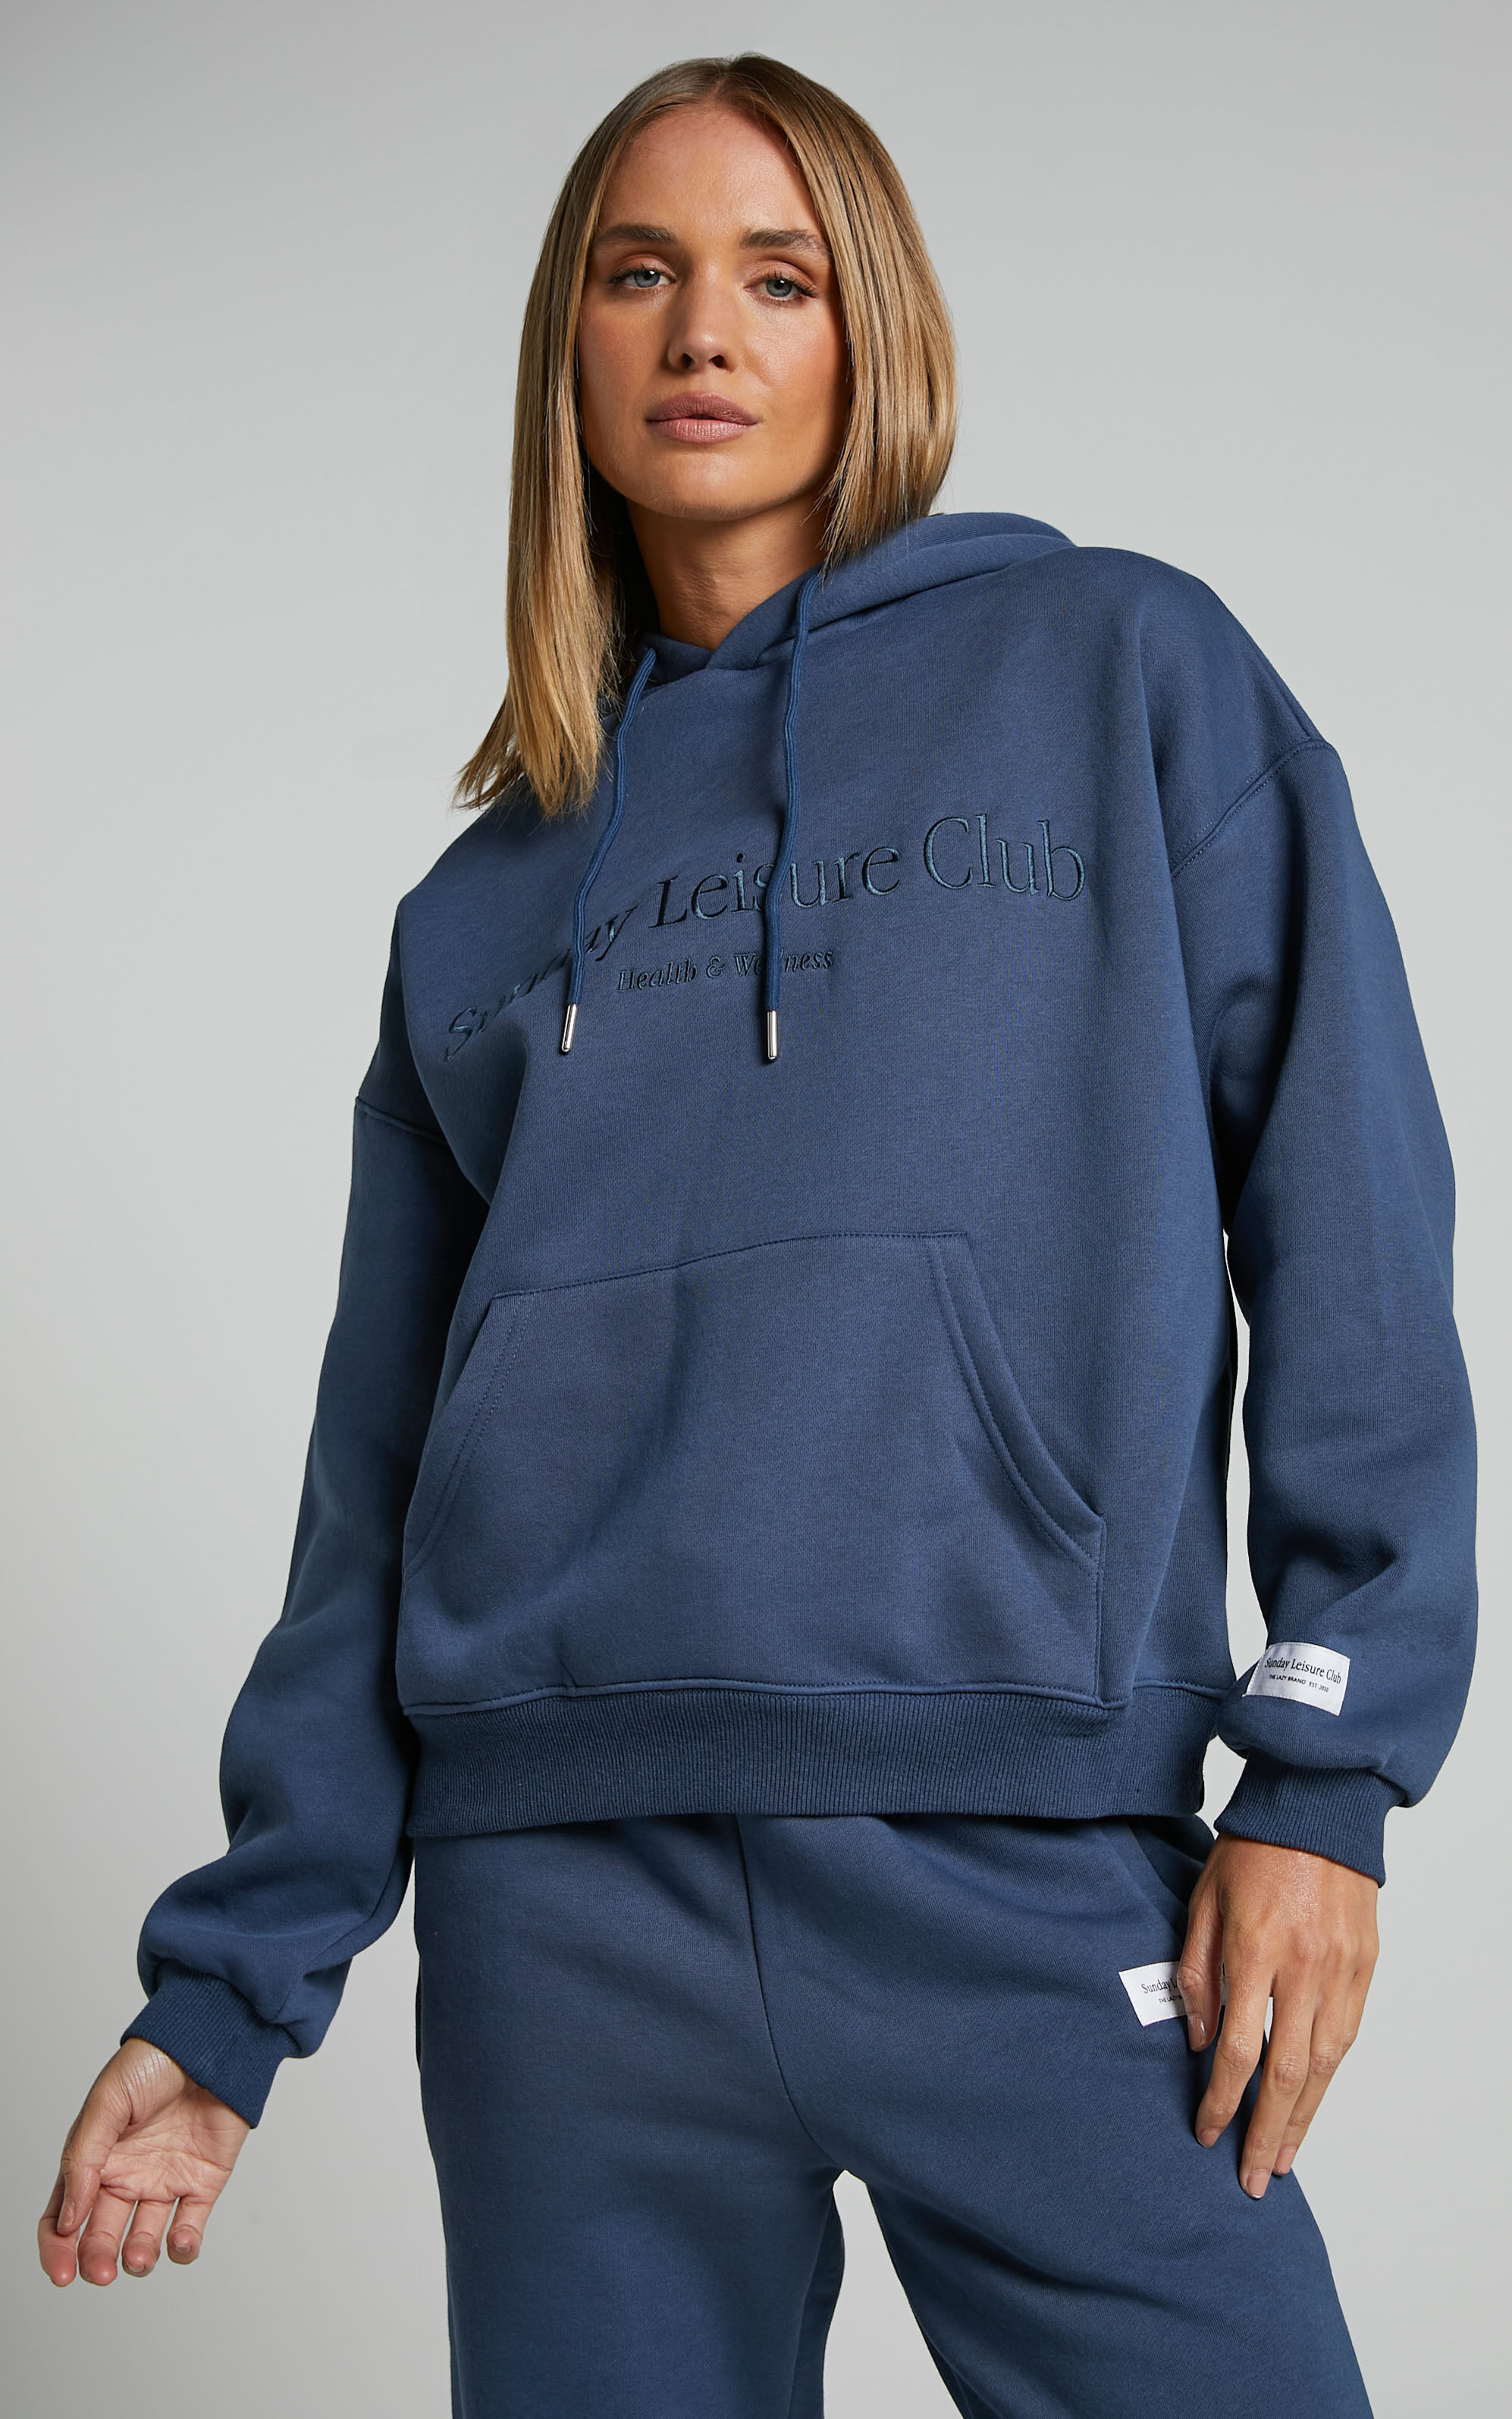 Sunday Leisure Club - The Lazy Hoodie SLC Graphic in Petrol Blue - 06, NVY1, super-hi-res image number null